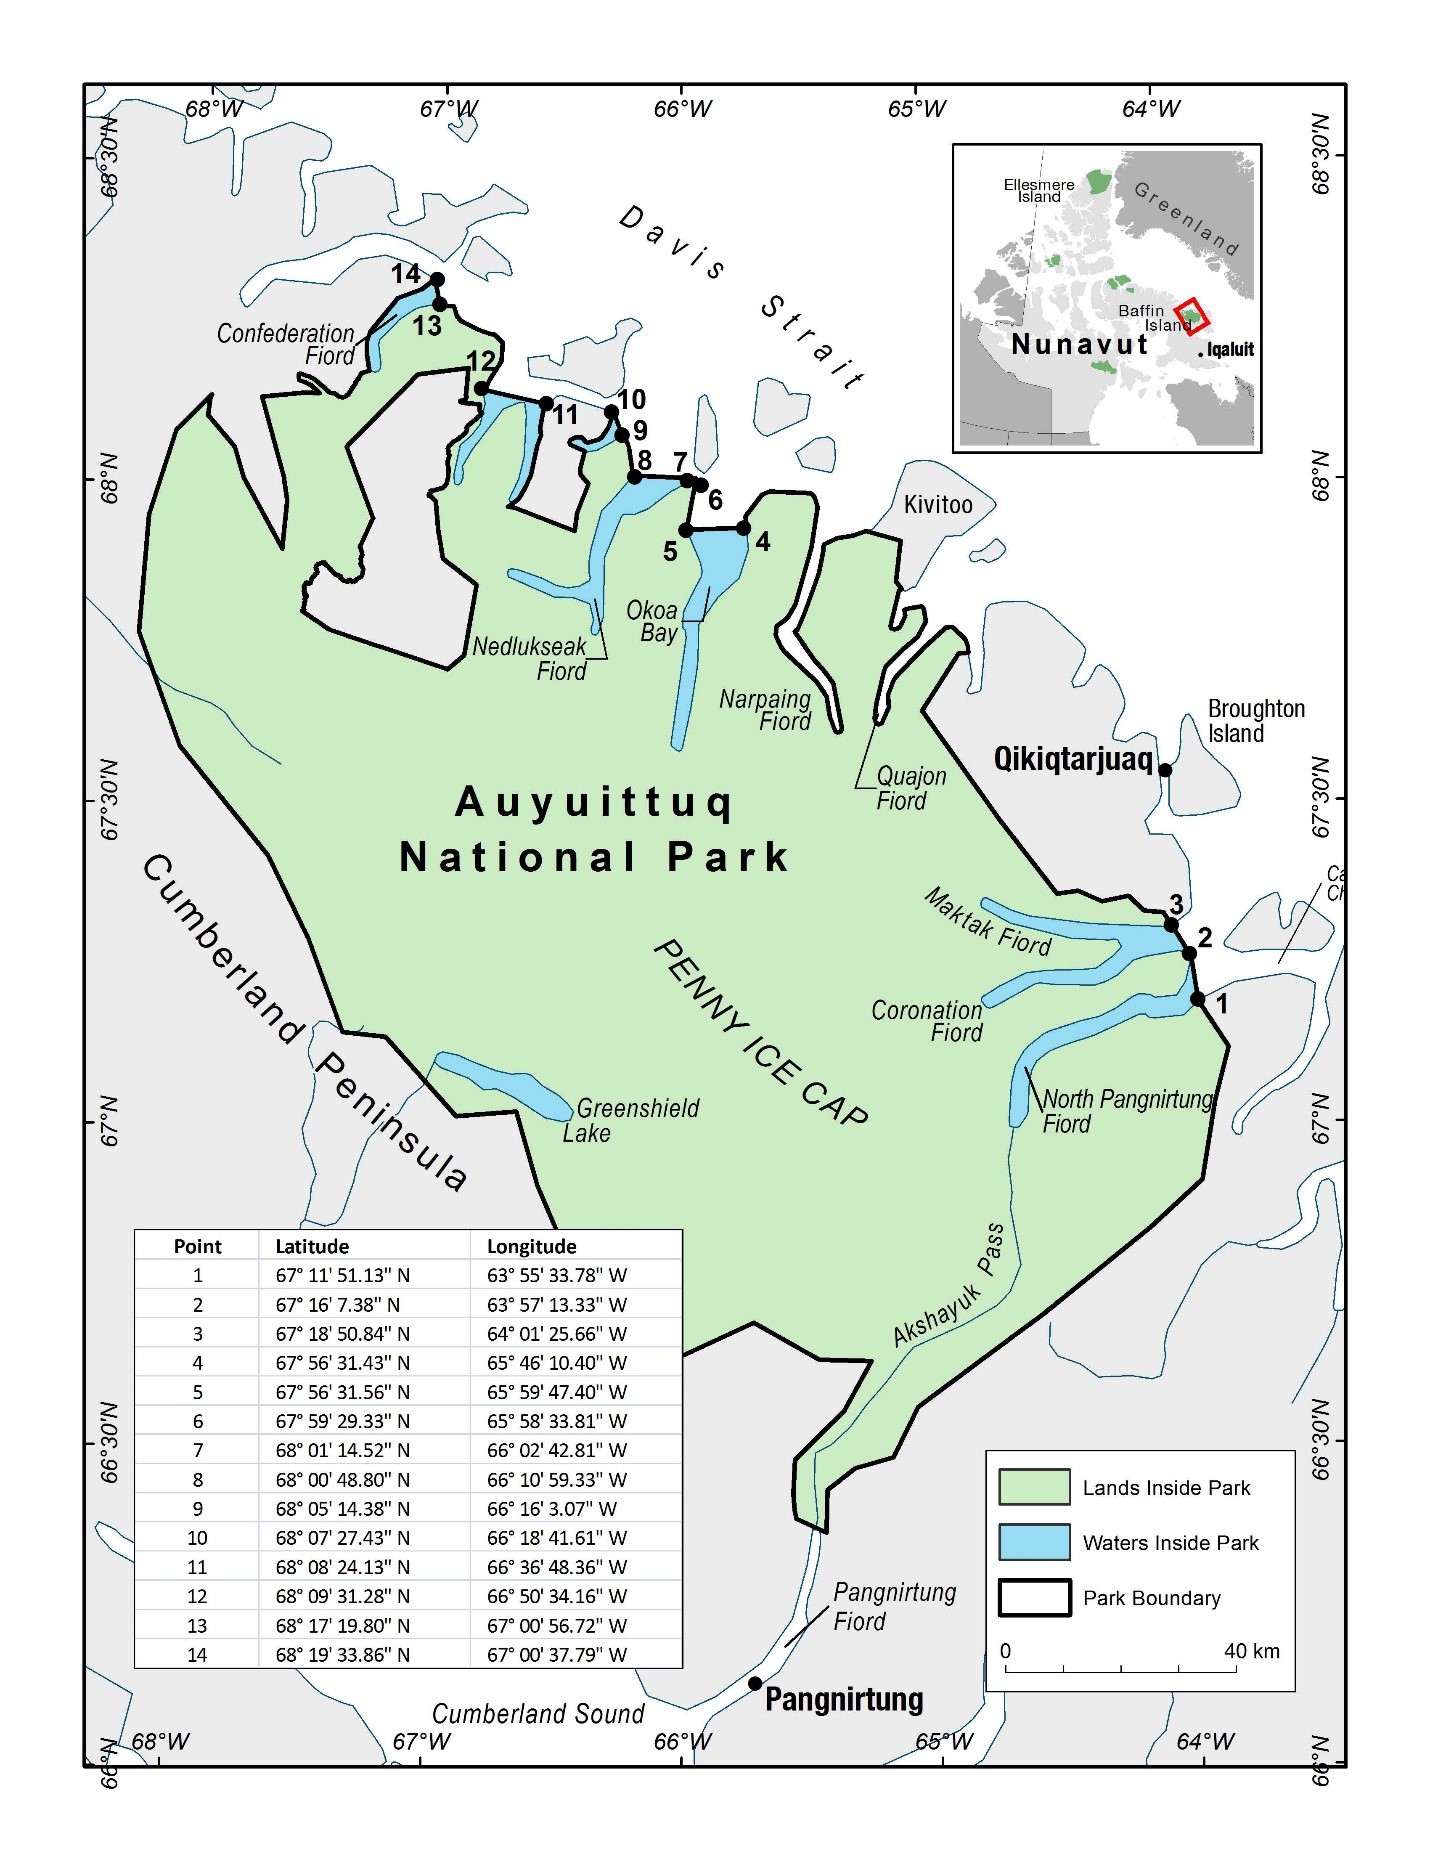 Map of Auyuittuq National Park of Canada with coordinate points to indicate its boundary when accessed by water.